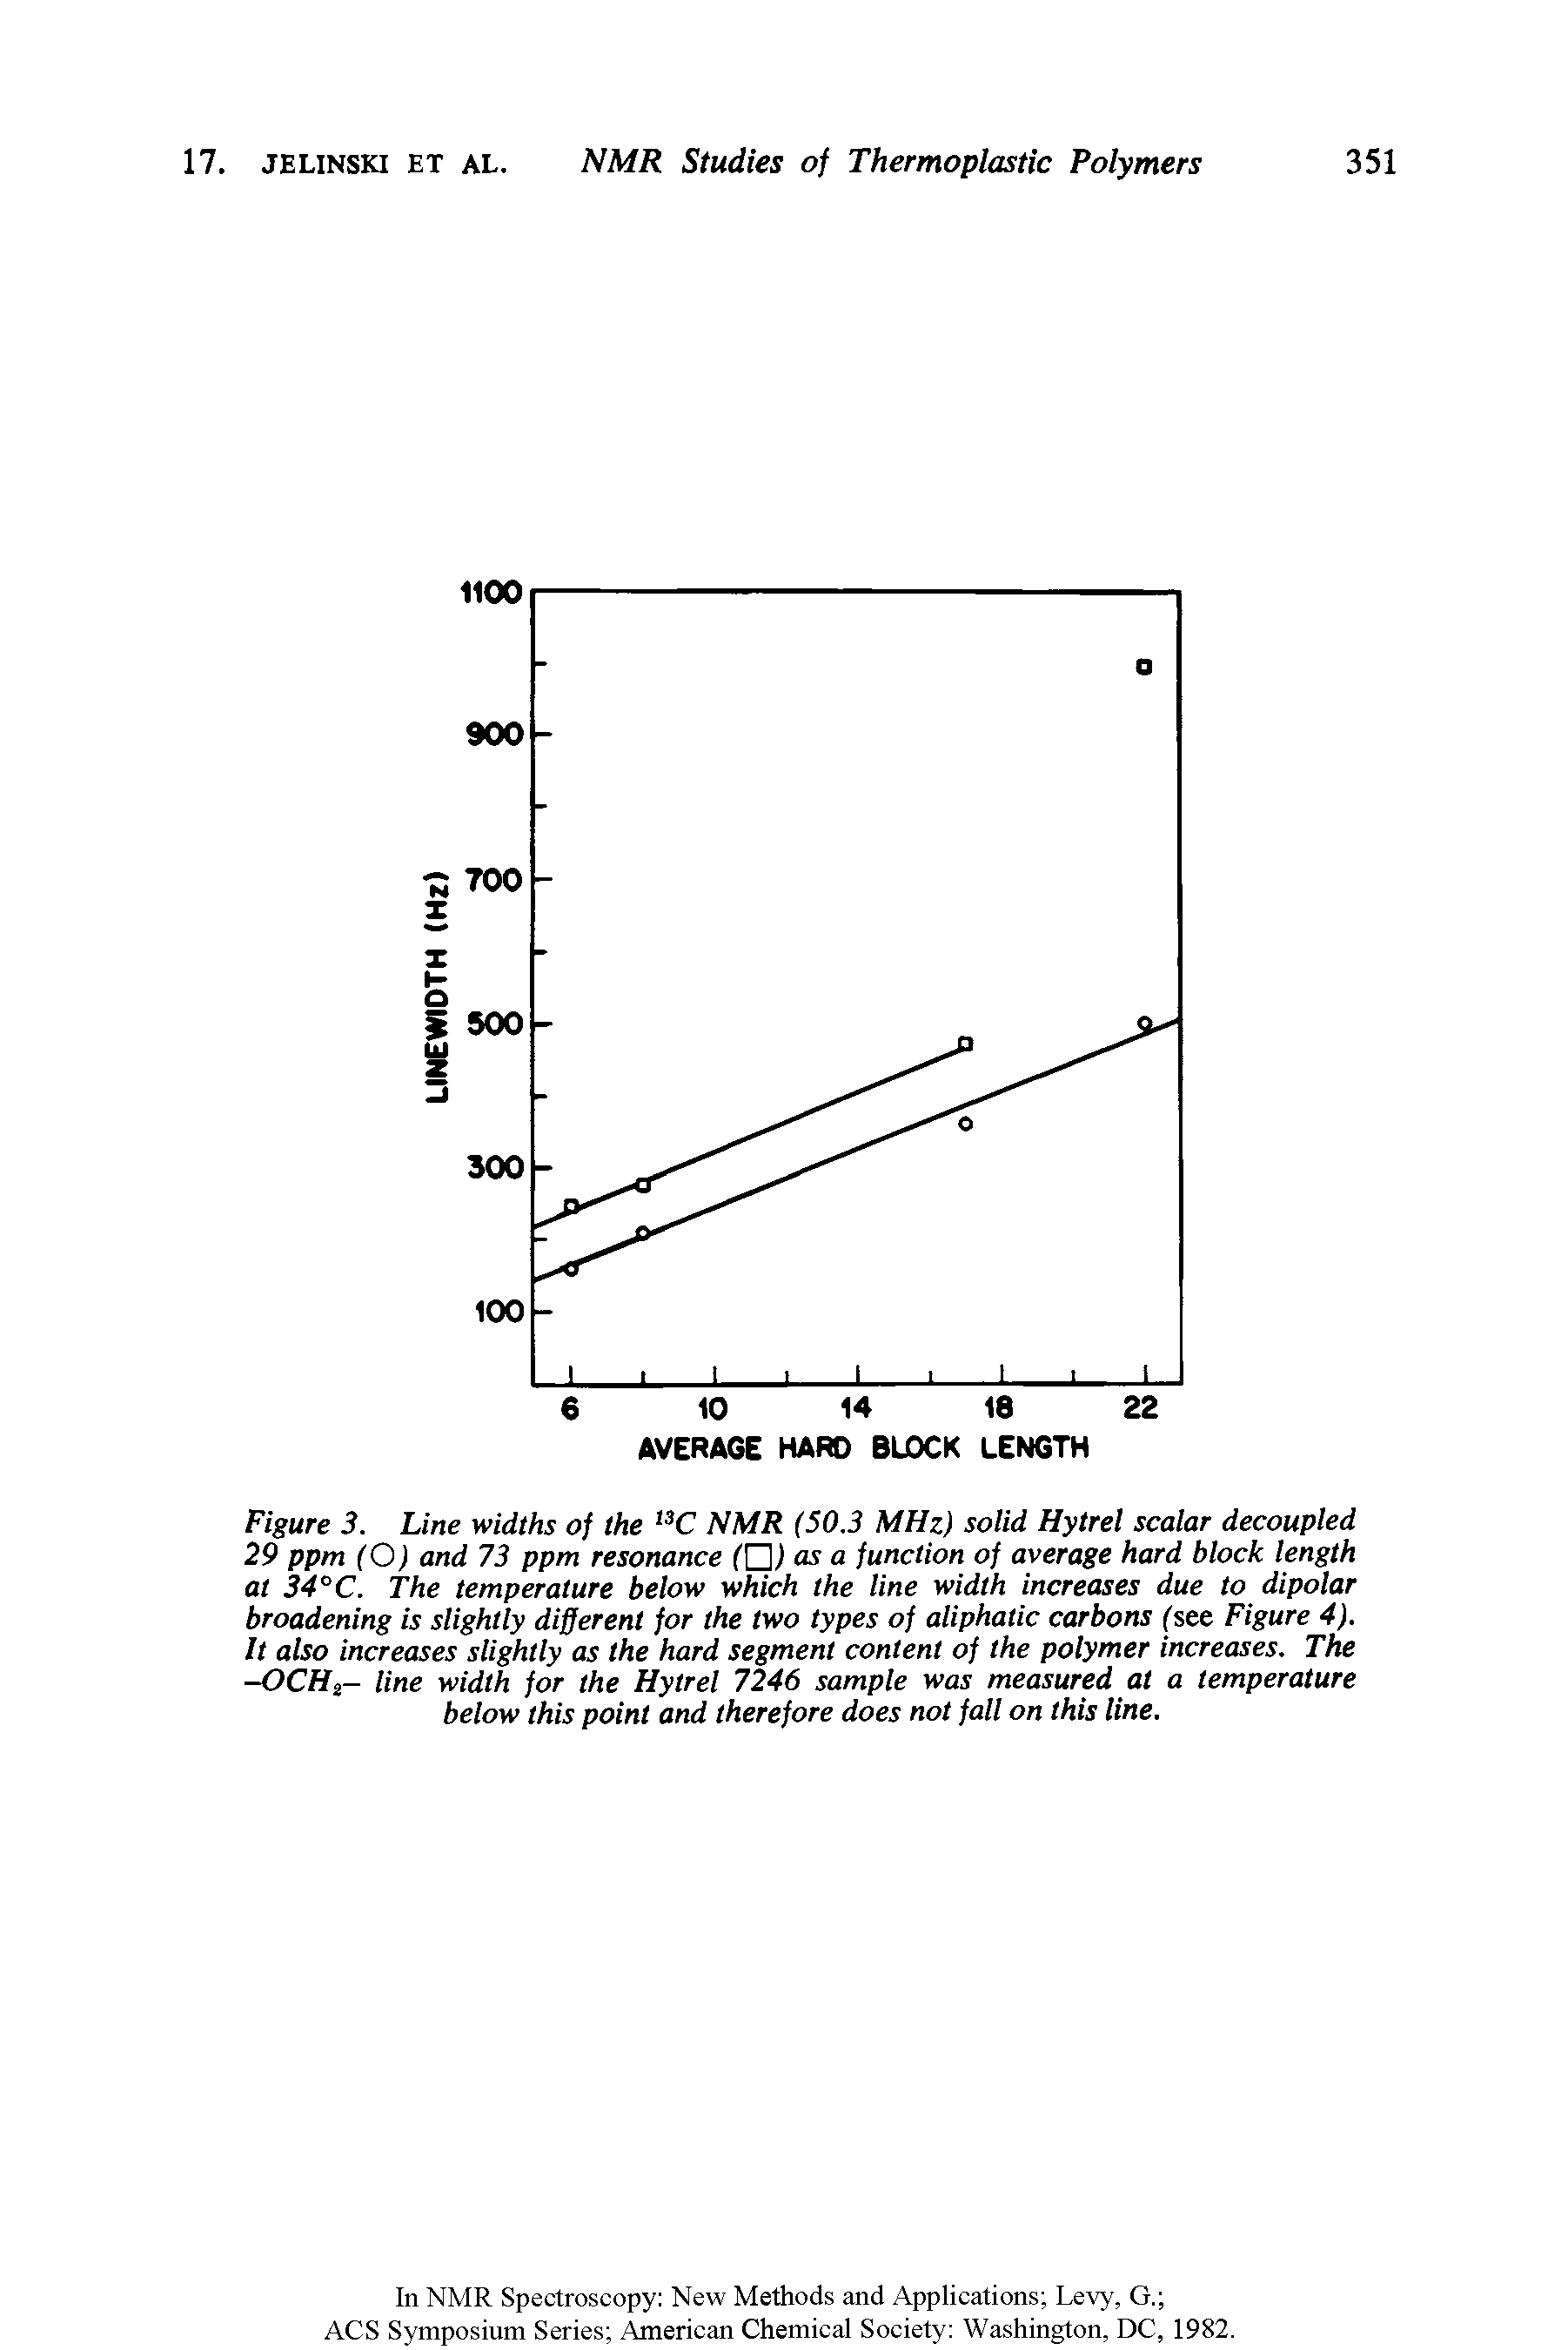 Figure 3. Line widths of the C NMR (50.3 MHz) solid Hytrel scalar decoupled 29 ppm (O) and 73 ppm resonance fOl as a function of average hard block length at 34°C. The temperature below which the line width increases due to dipolar broadening is slightly different for the two types of aliphatic carbons fsee Figure 4). It also increases slightly as the hard segment content of the polymer increases. The -OCHi- line width for the Hytrel 7246 sample was measured at a temperature below this point and therefore does not fall on this line.